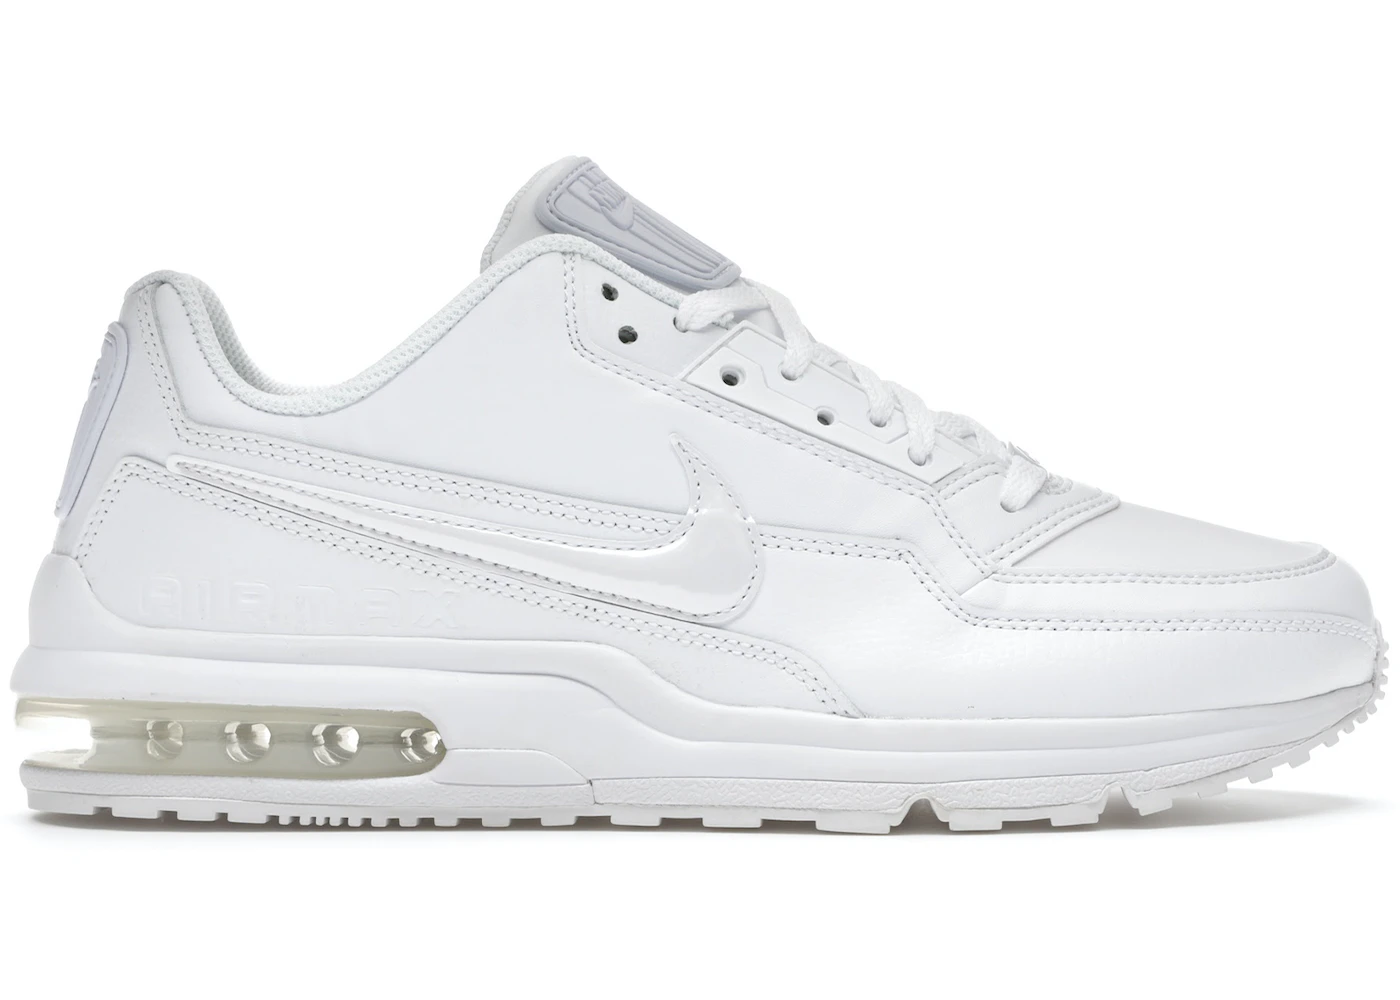 Coincidence Distract tuberculosis Nike Air Max LTD 3 White - 687977-111